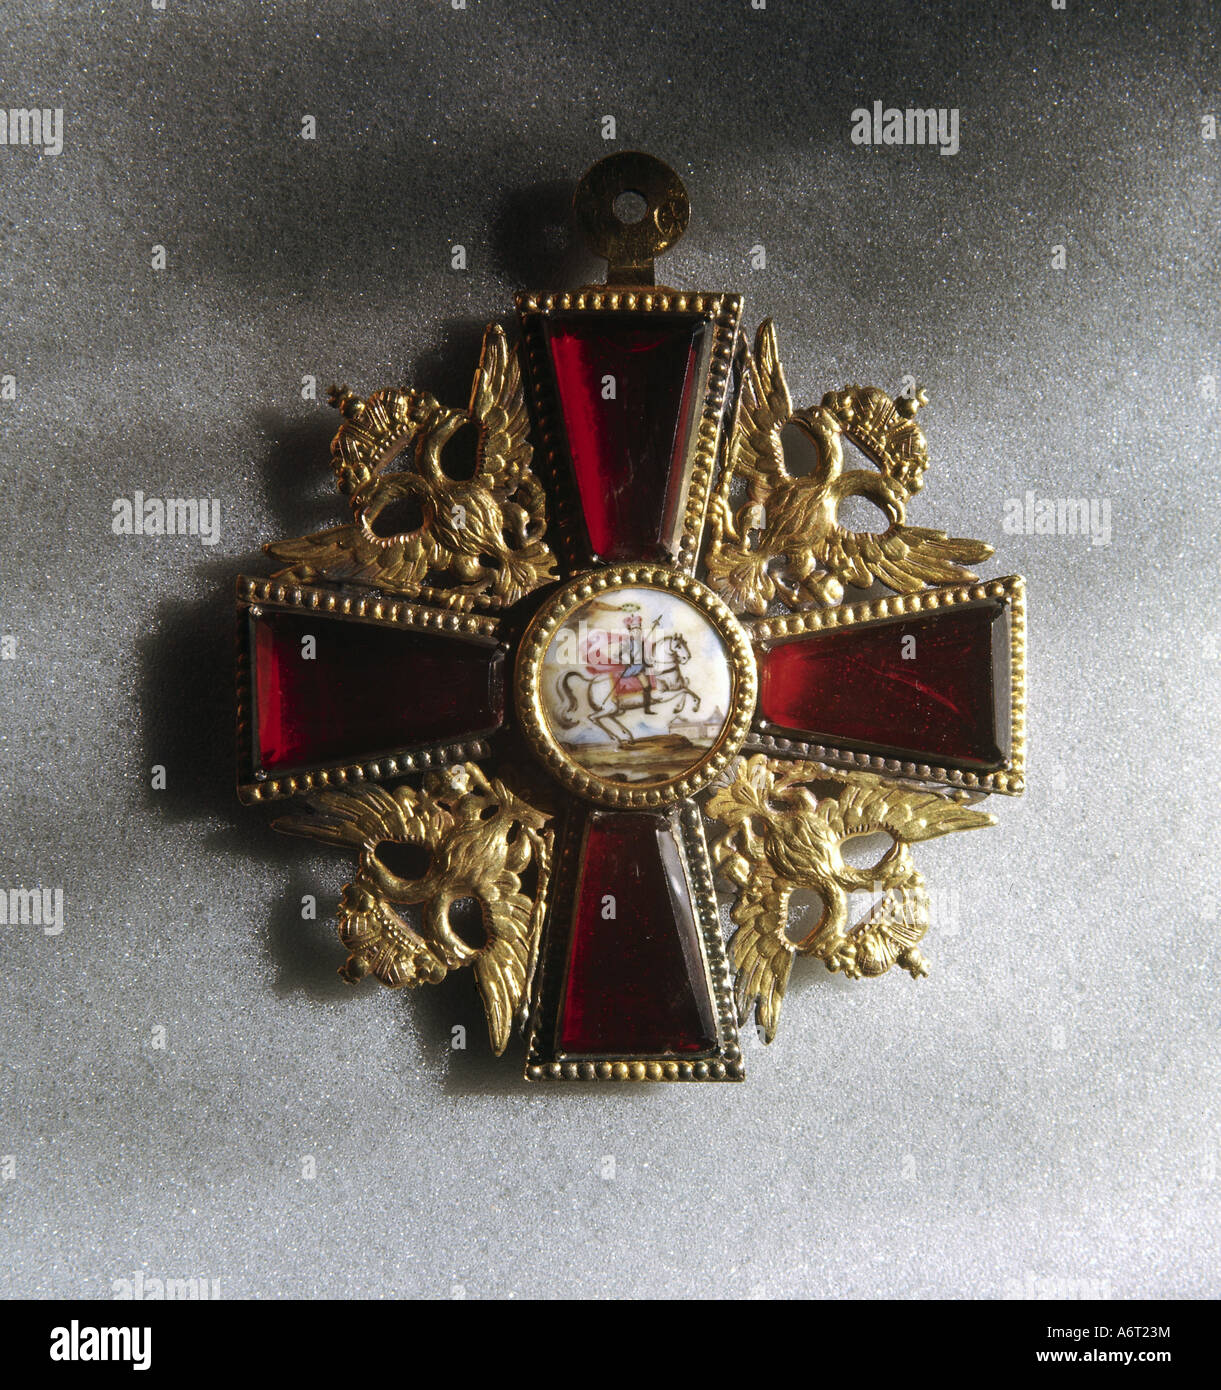 decorations, Russia, Alexander Nevsky order, grand cross, instituted 1722, by tsar Peter I 'the Great', decoration, , Stock Photo